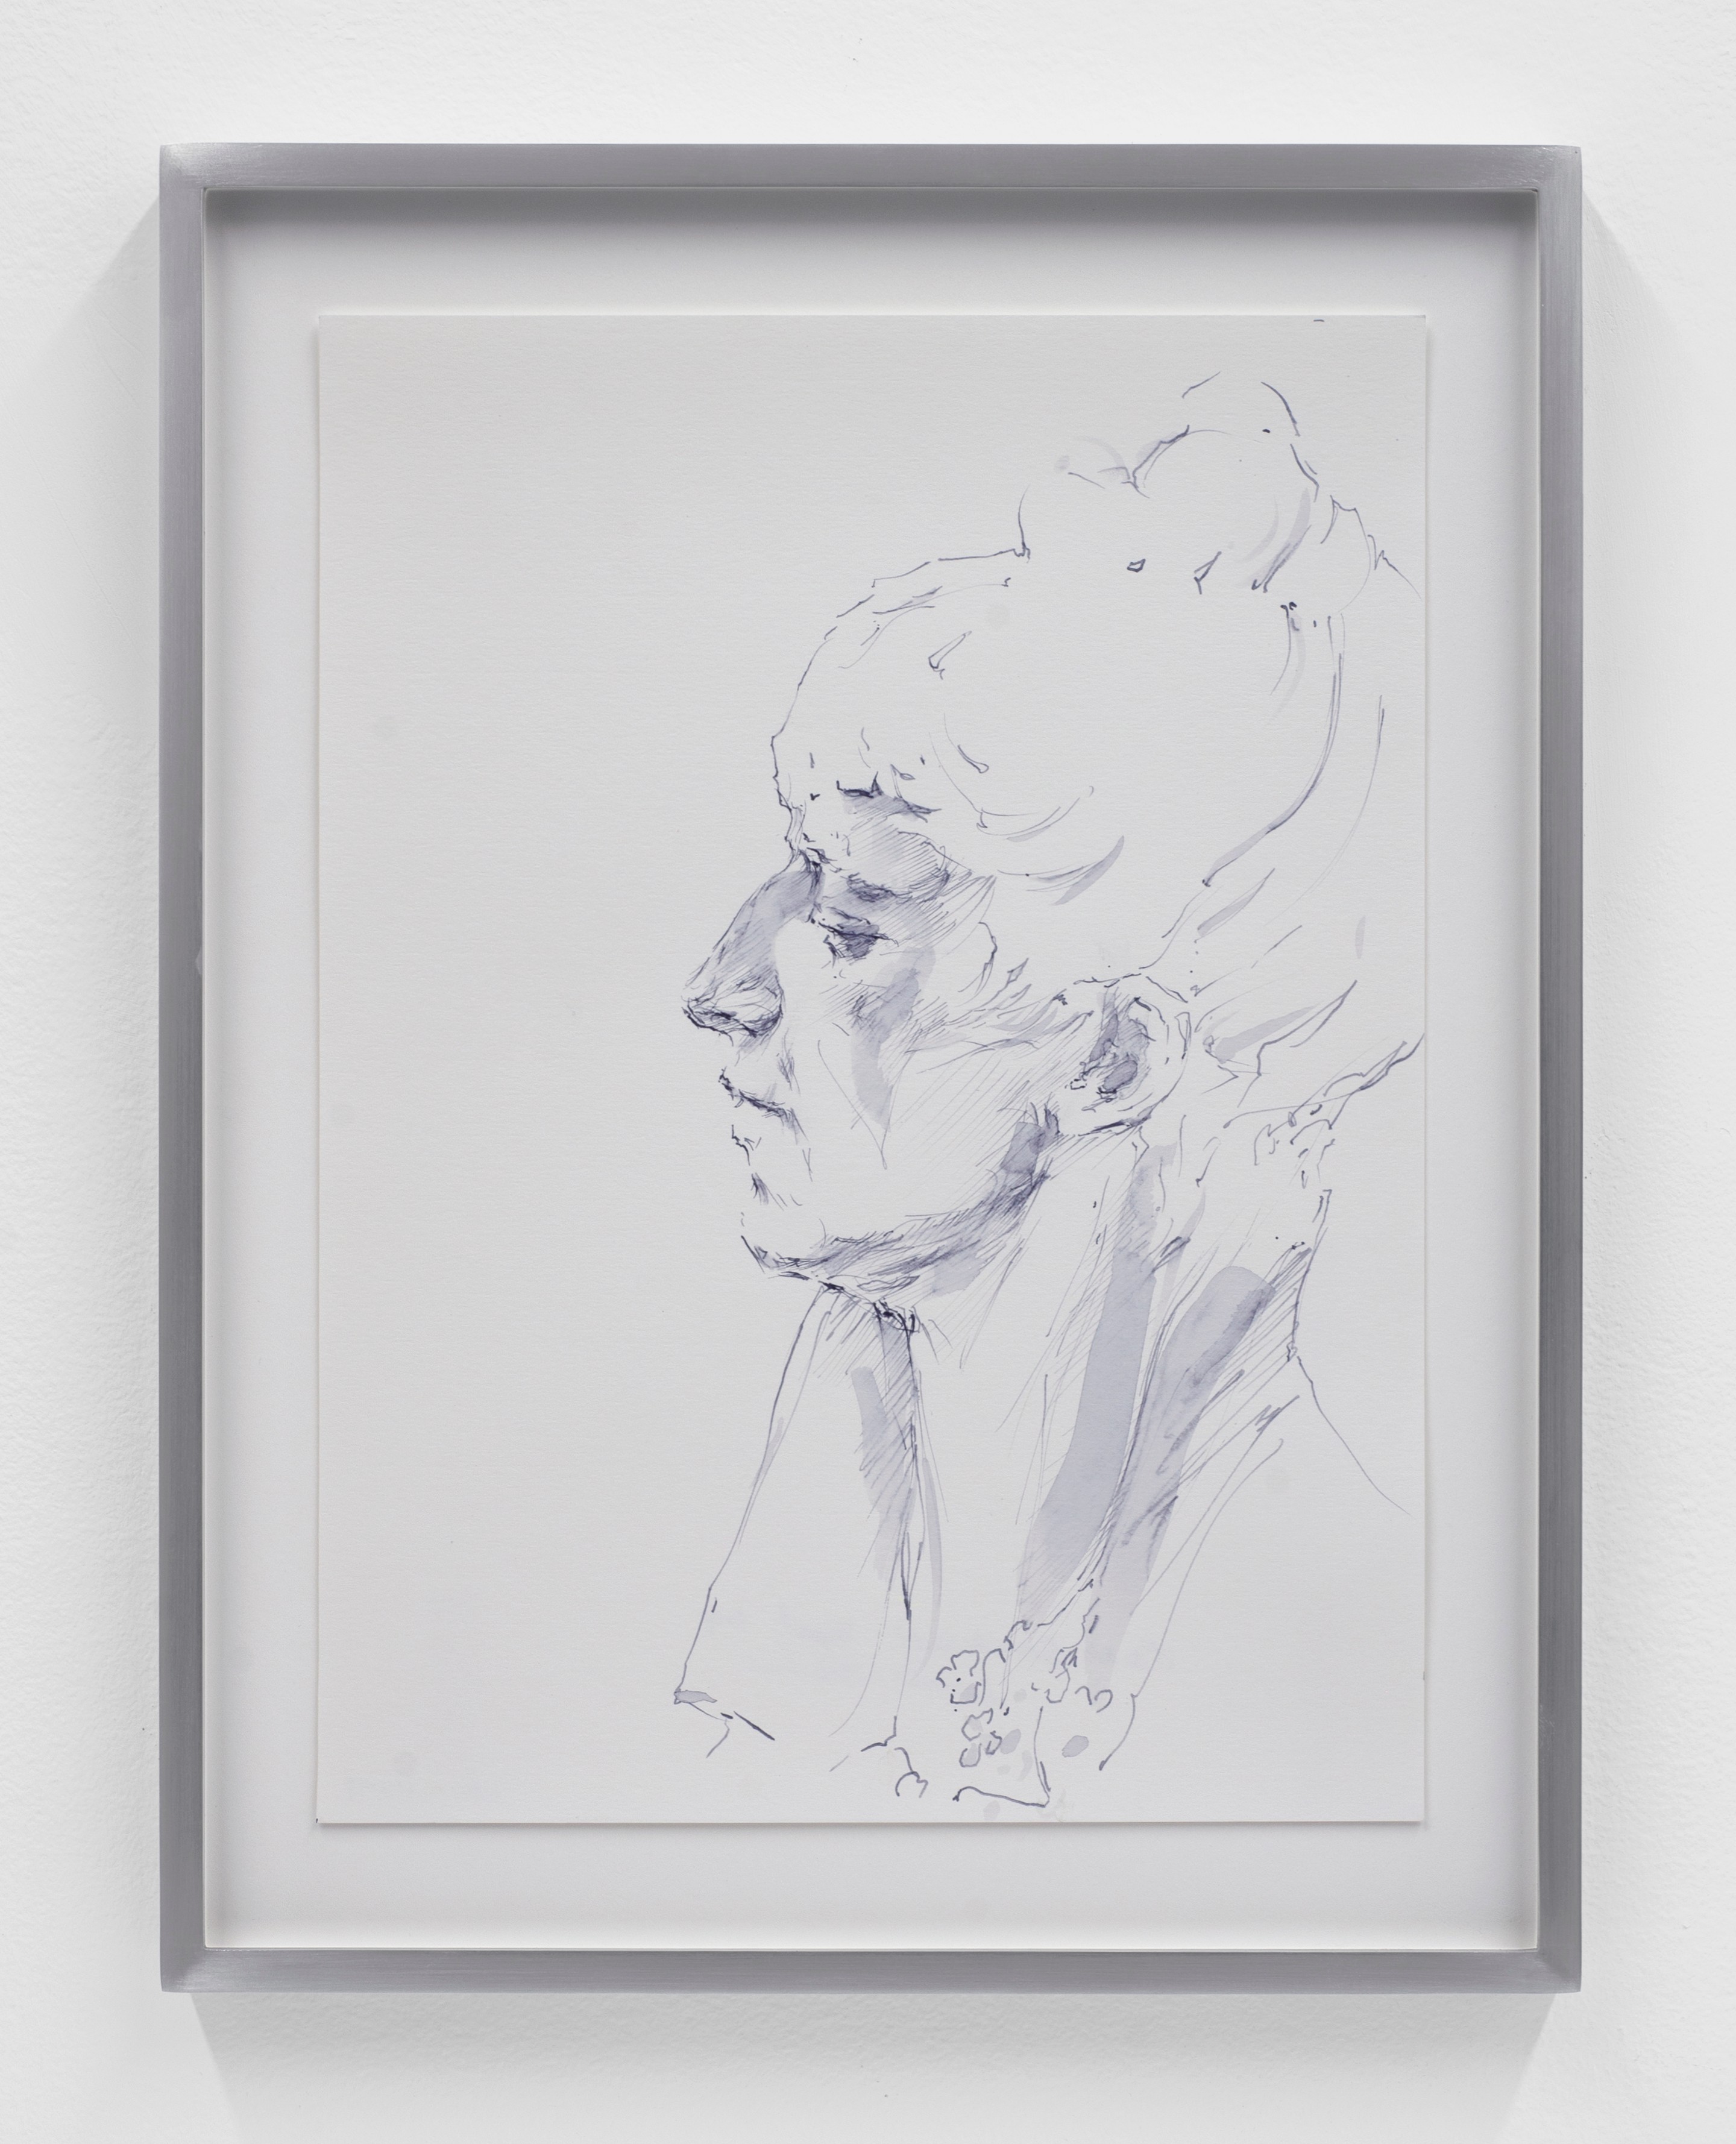 Untitled (bust of Louise Abbéma by Sarah Bernhardt) (2019)
Ink on paper
14.4 x 11 in (36.5 x 28 cm) Framed